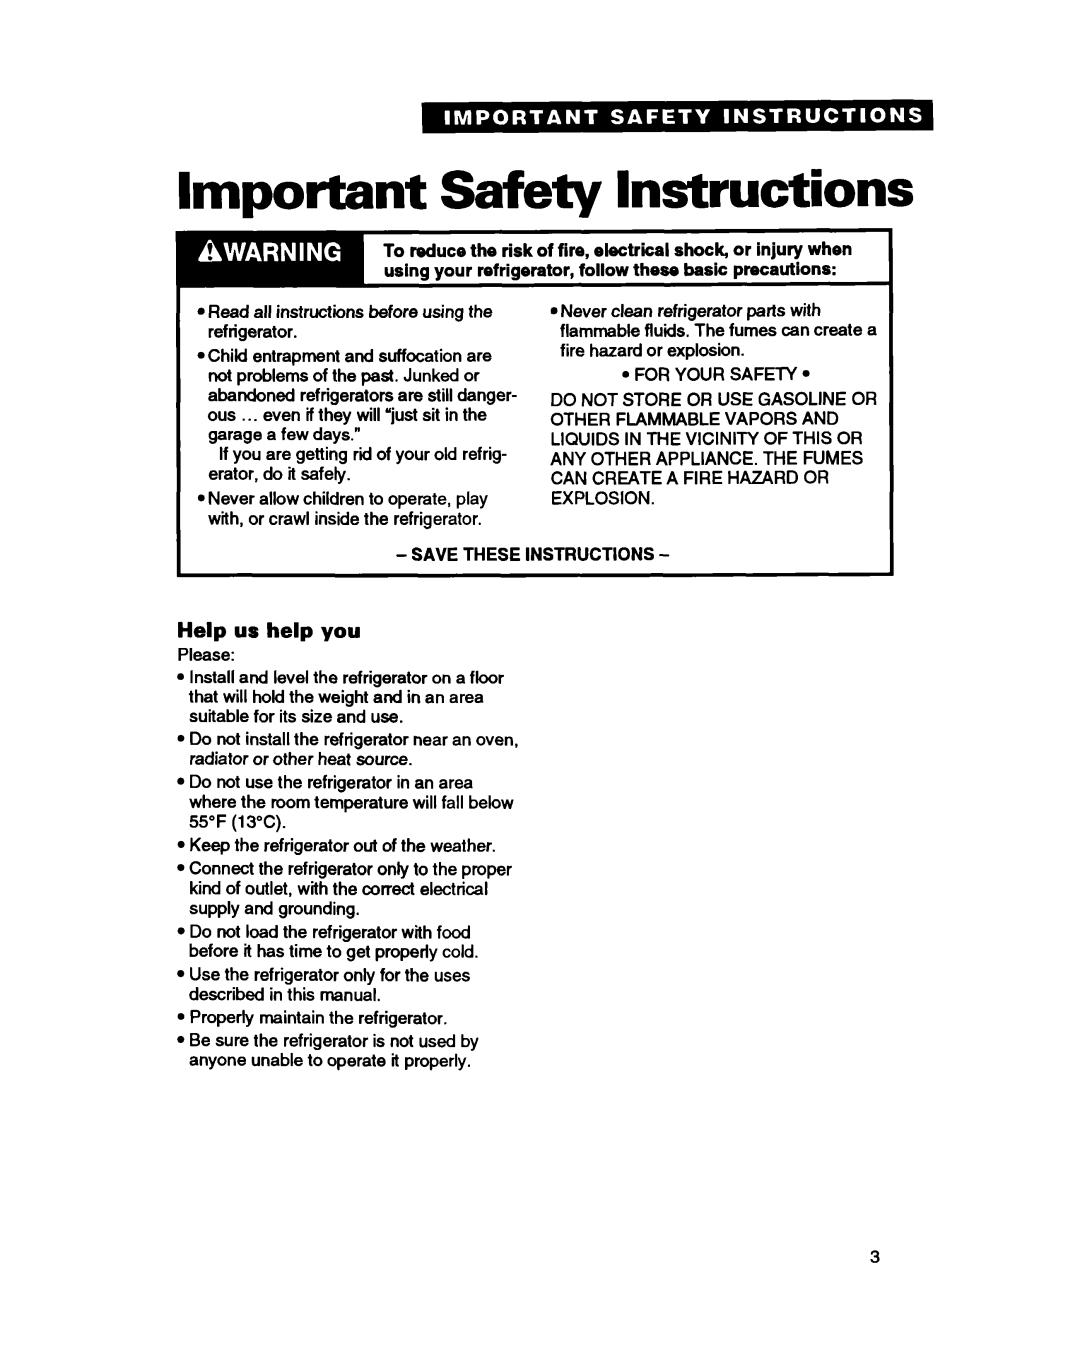 Whirlpool ED22DC warranty Important Safety Instructions, Help us help you, Save These Instructions 